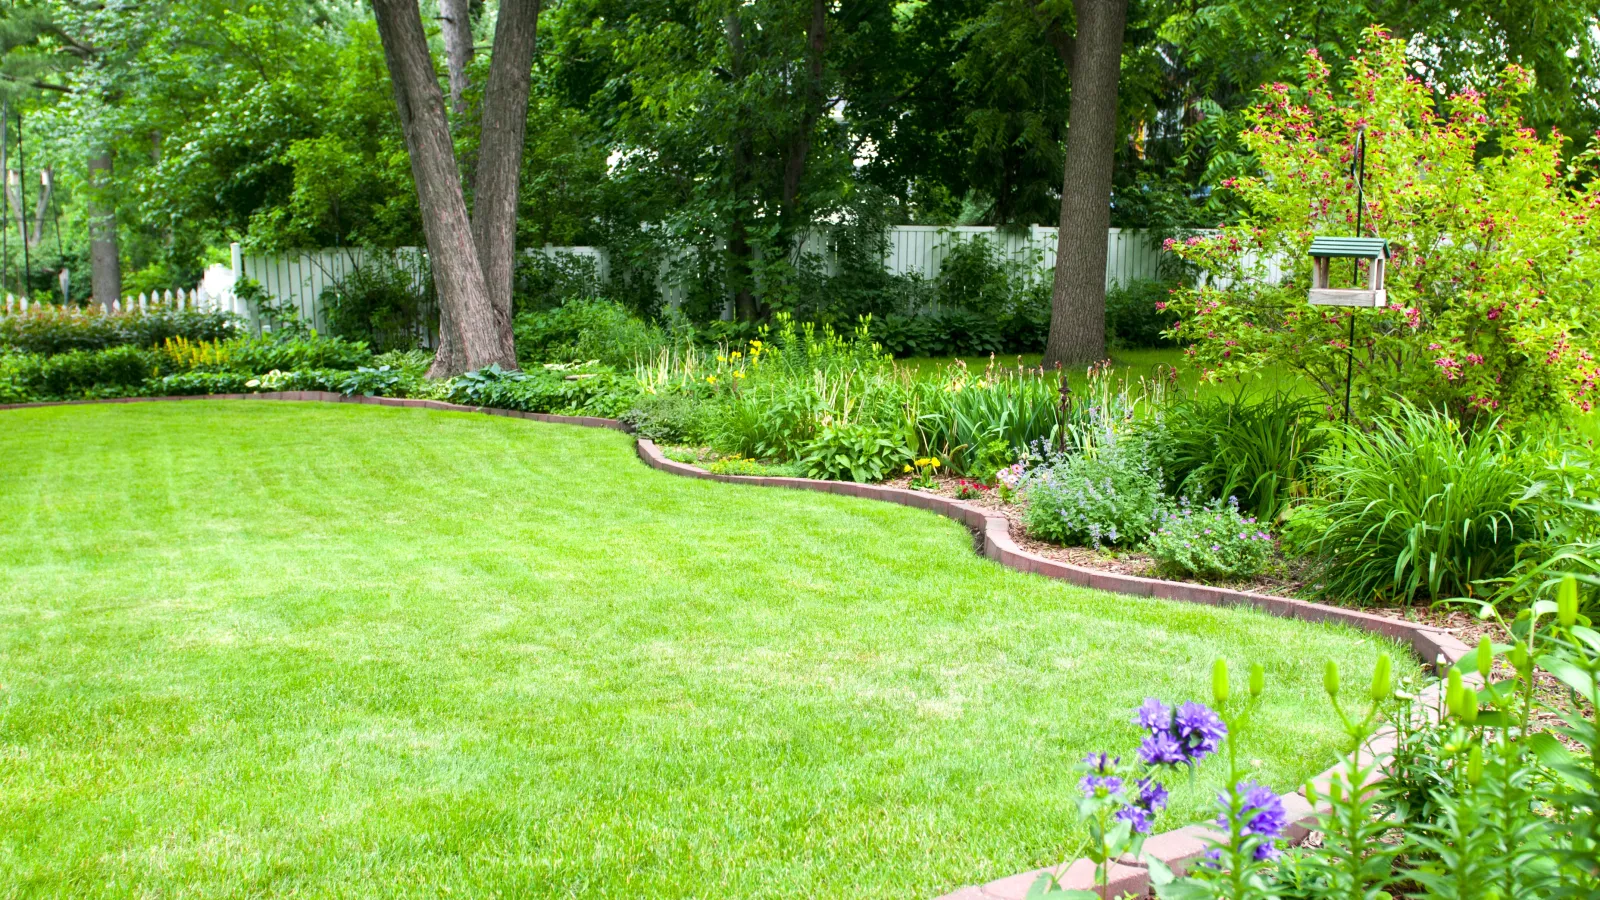 backyard with and garden beds, trees, and grassy areas